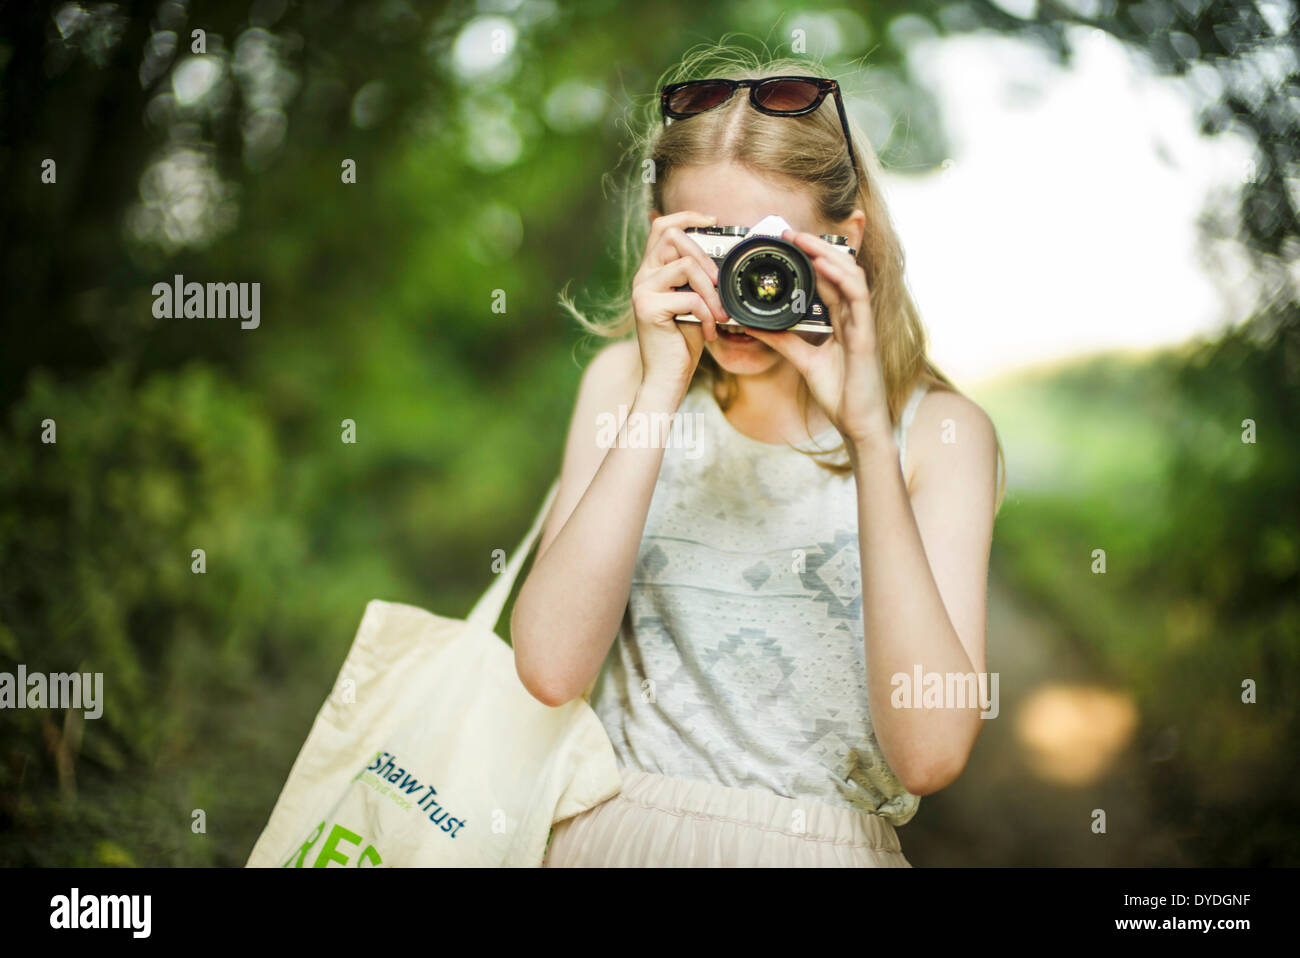 A young girl with a film camera. Stock Photo